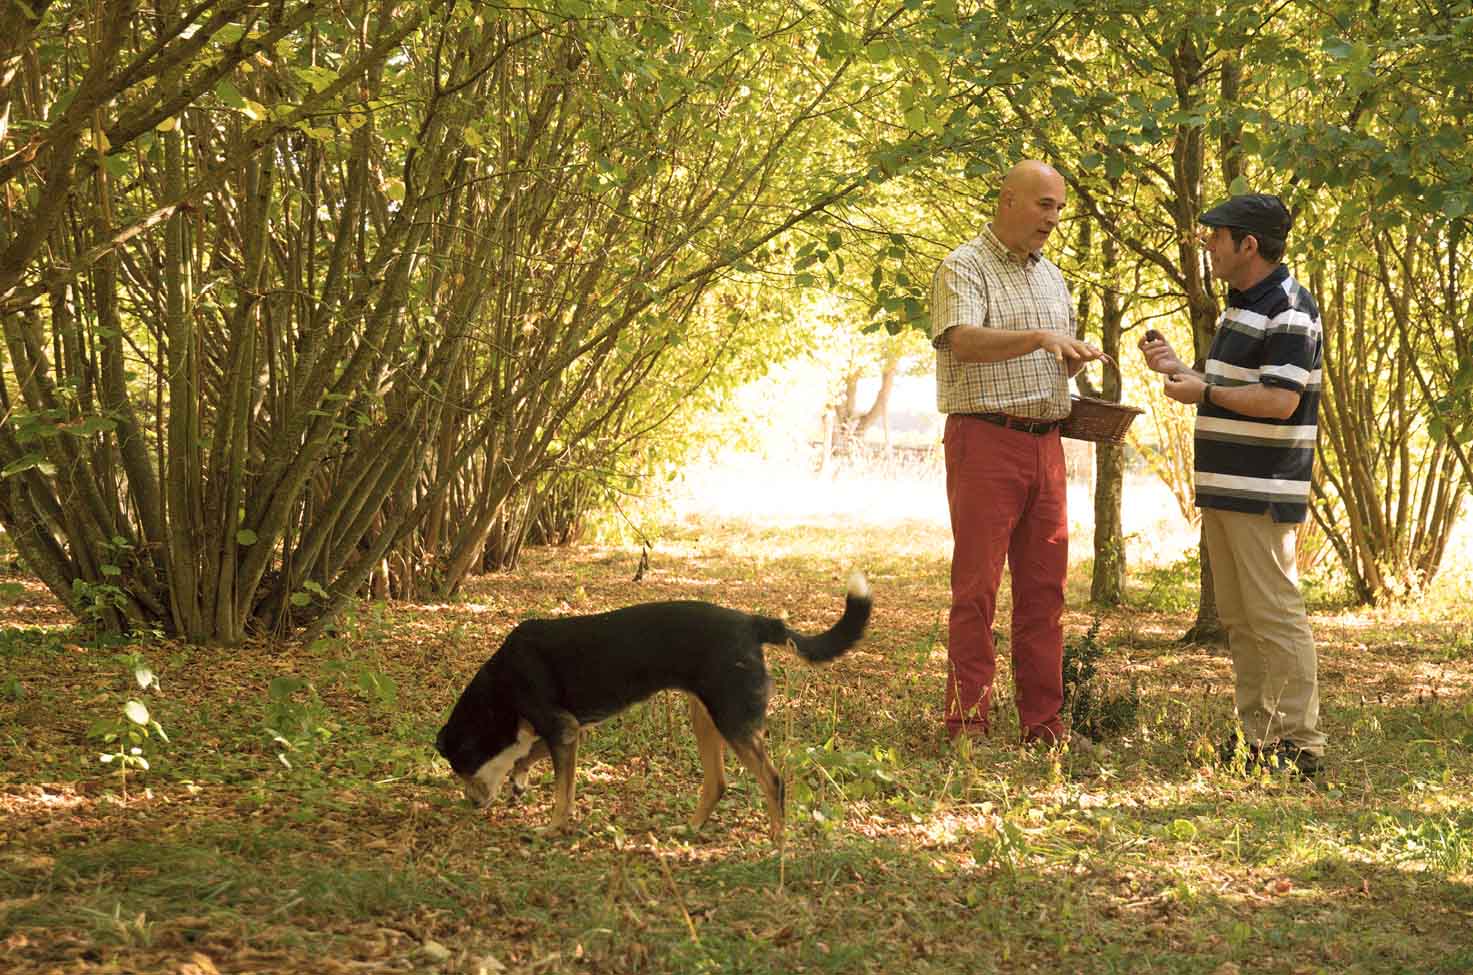 A truffle farmer and a guest standing in a woodland area, one is holding a truffle and a dog sniffs the ground in front